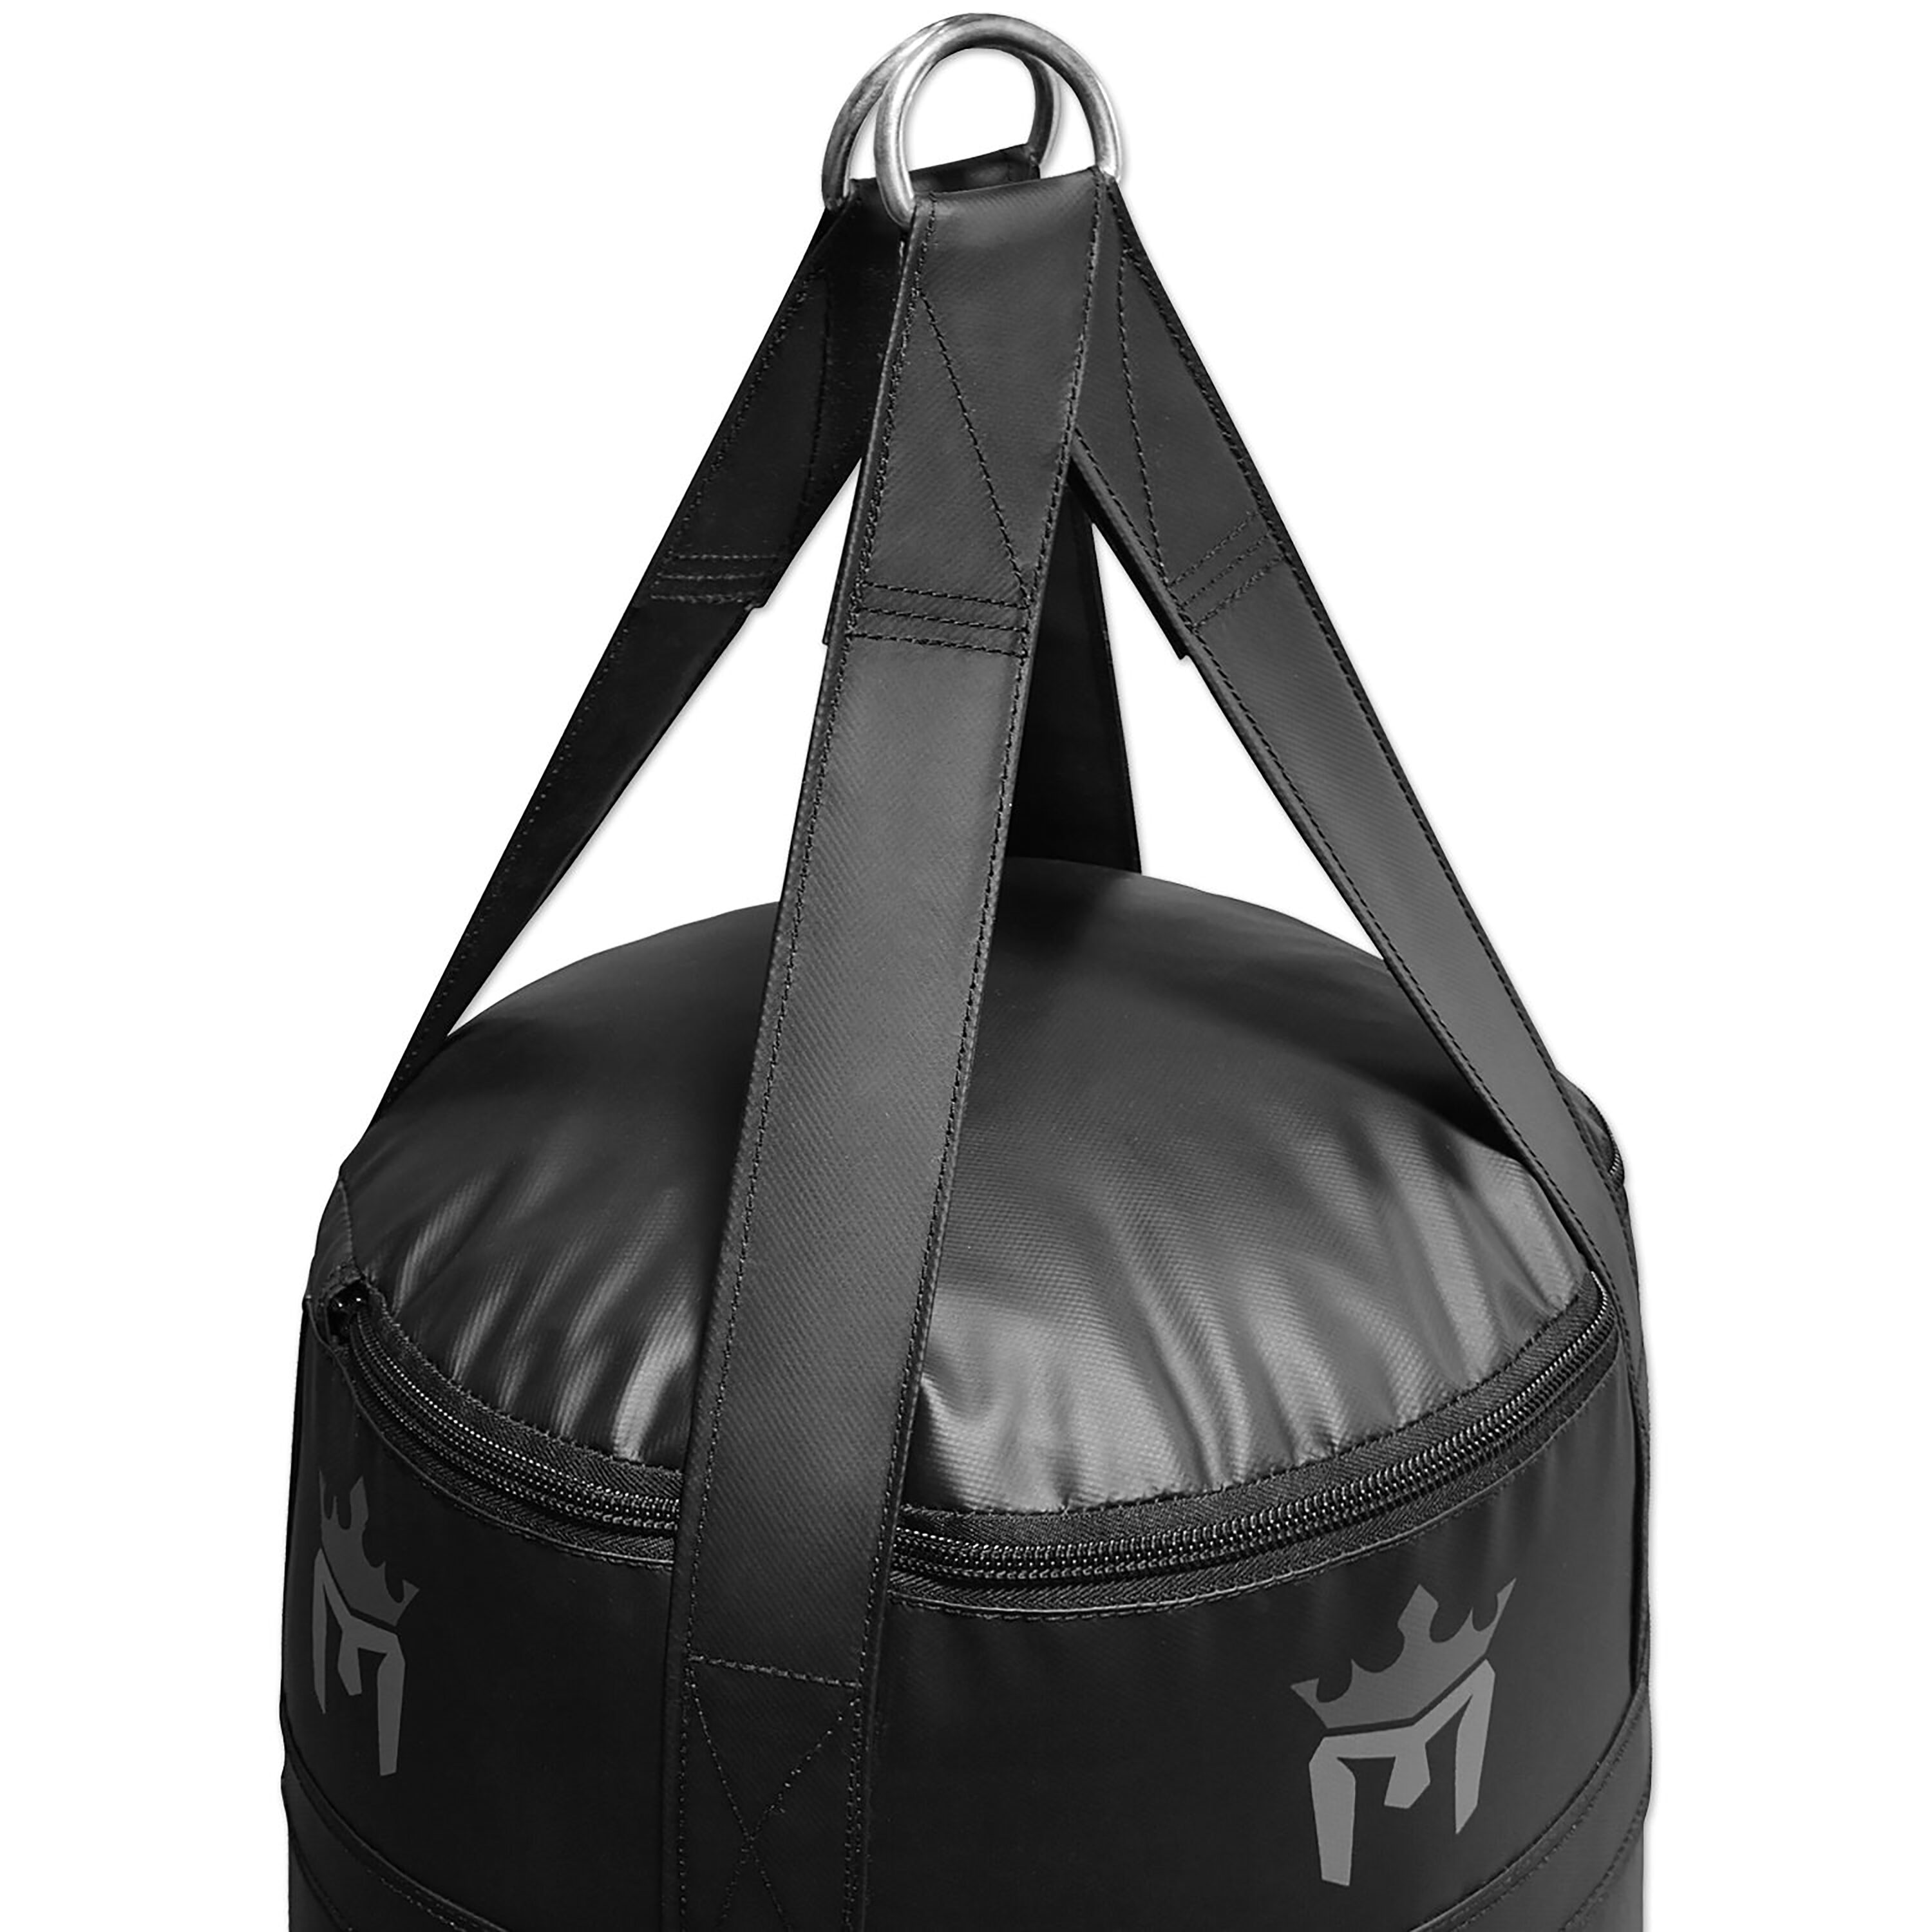 Meister 90 lb Filled X-Wide Boxing Heavy Bag - 44-in x 16-in - Vinyl ...